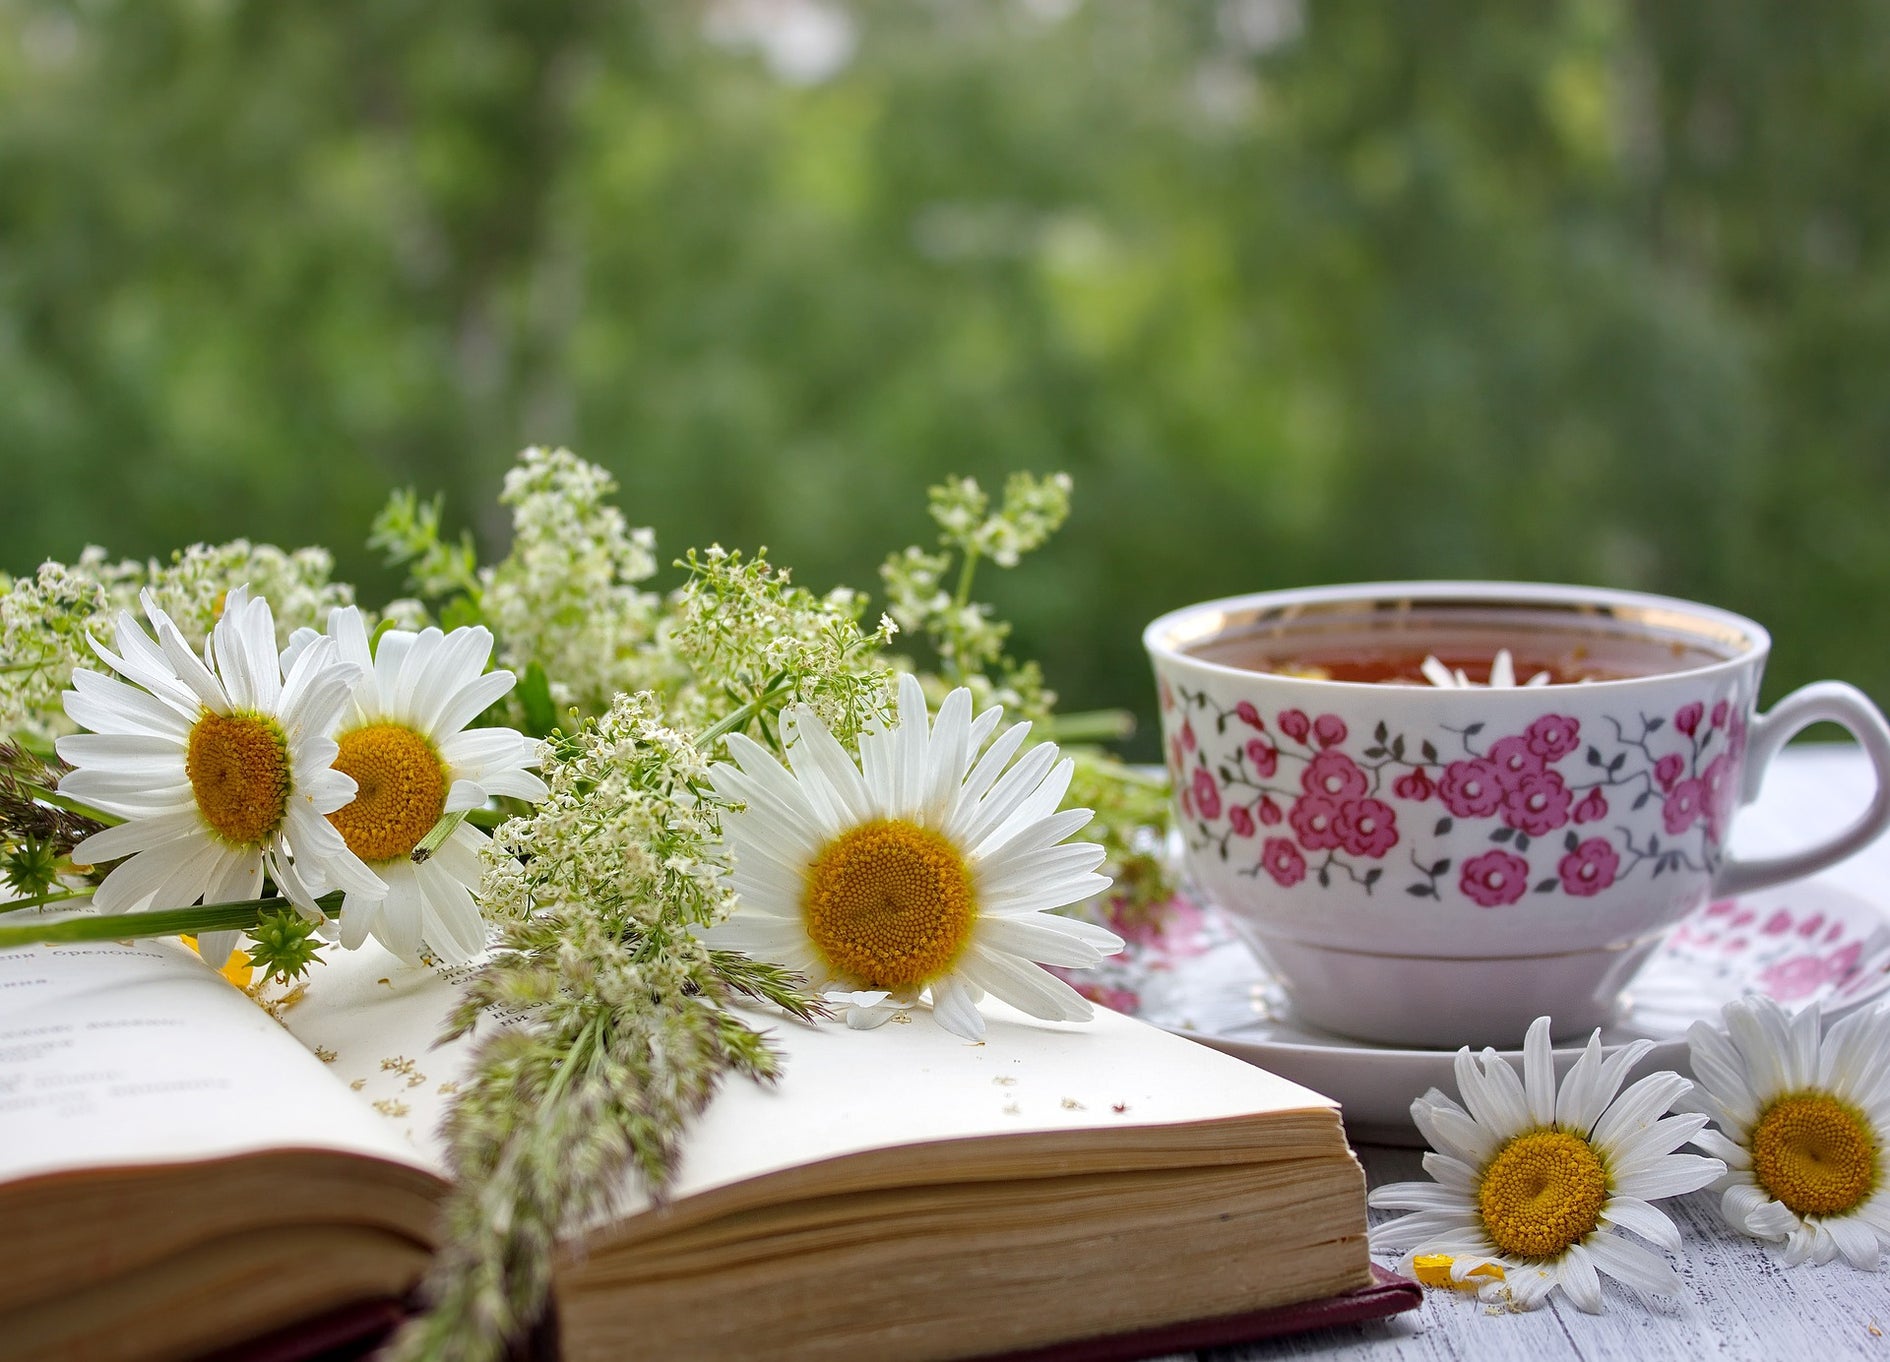 Find Your Tea Book: Our Top 10 Best Books About Tea (In No Particular Order)